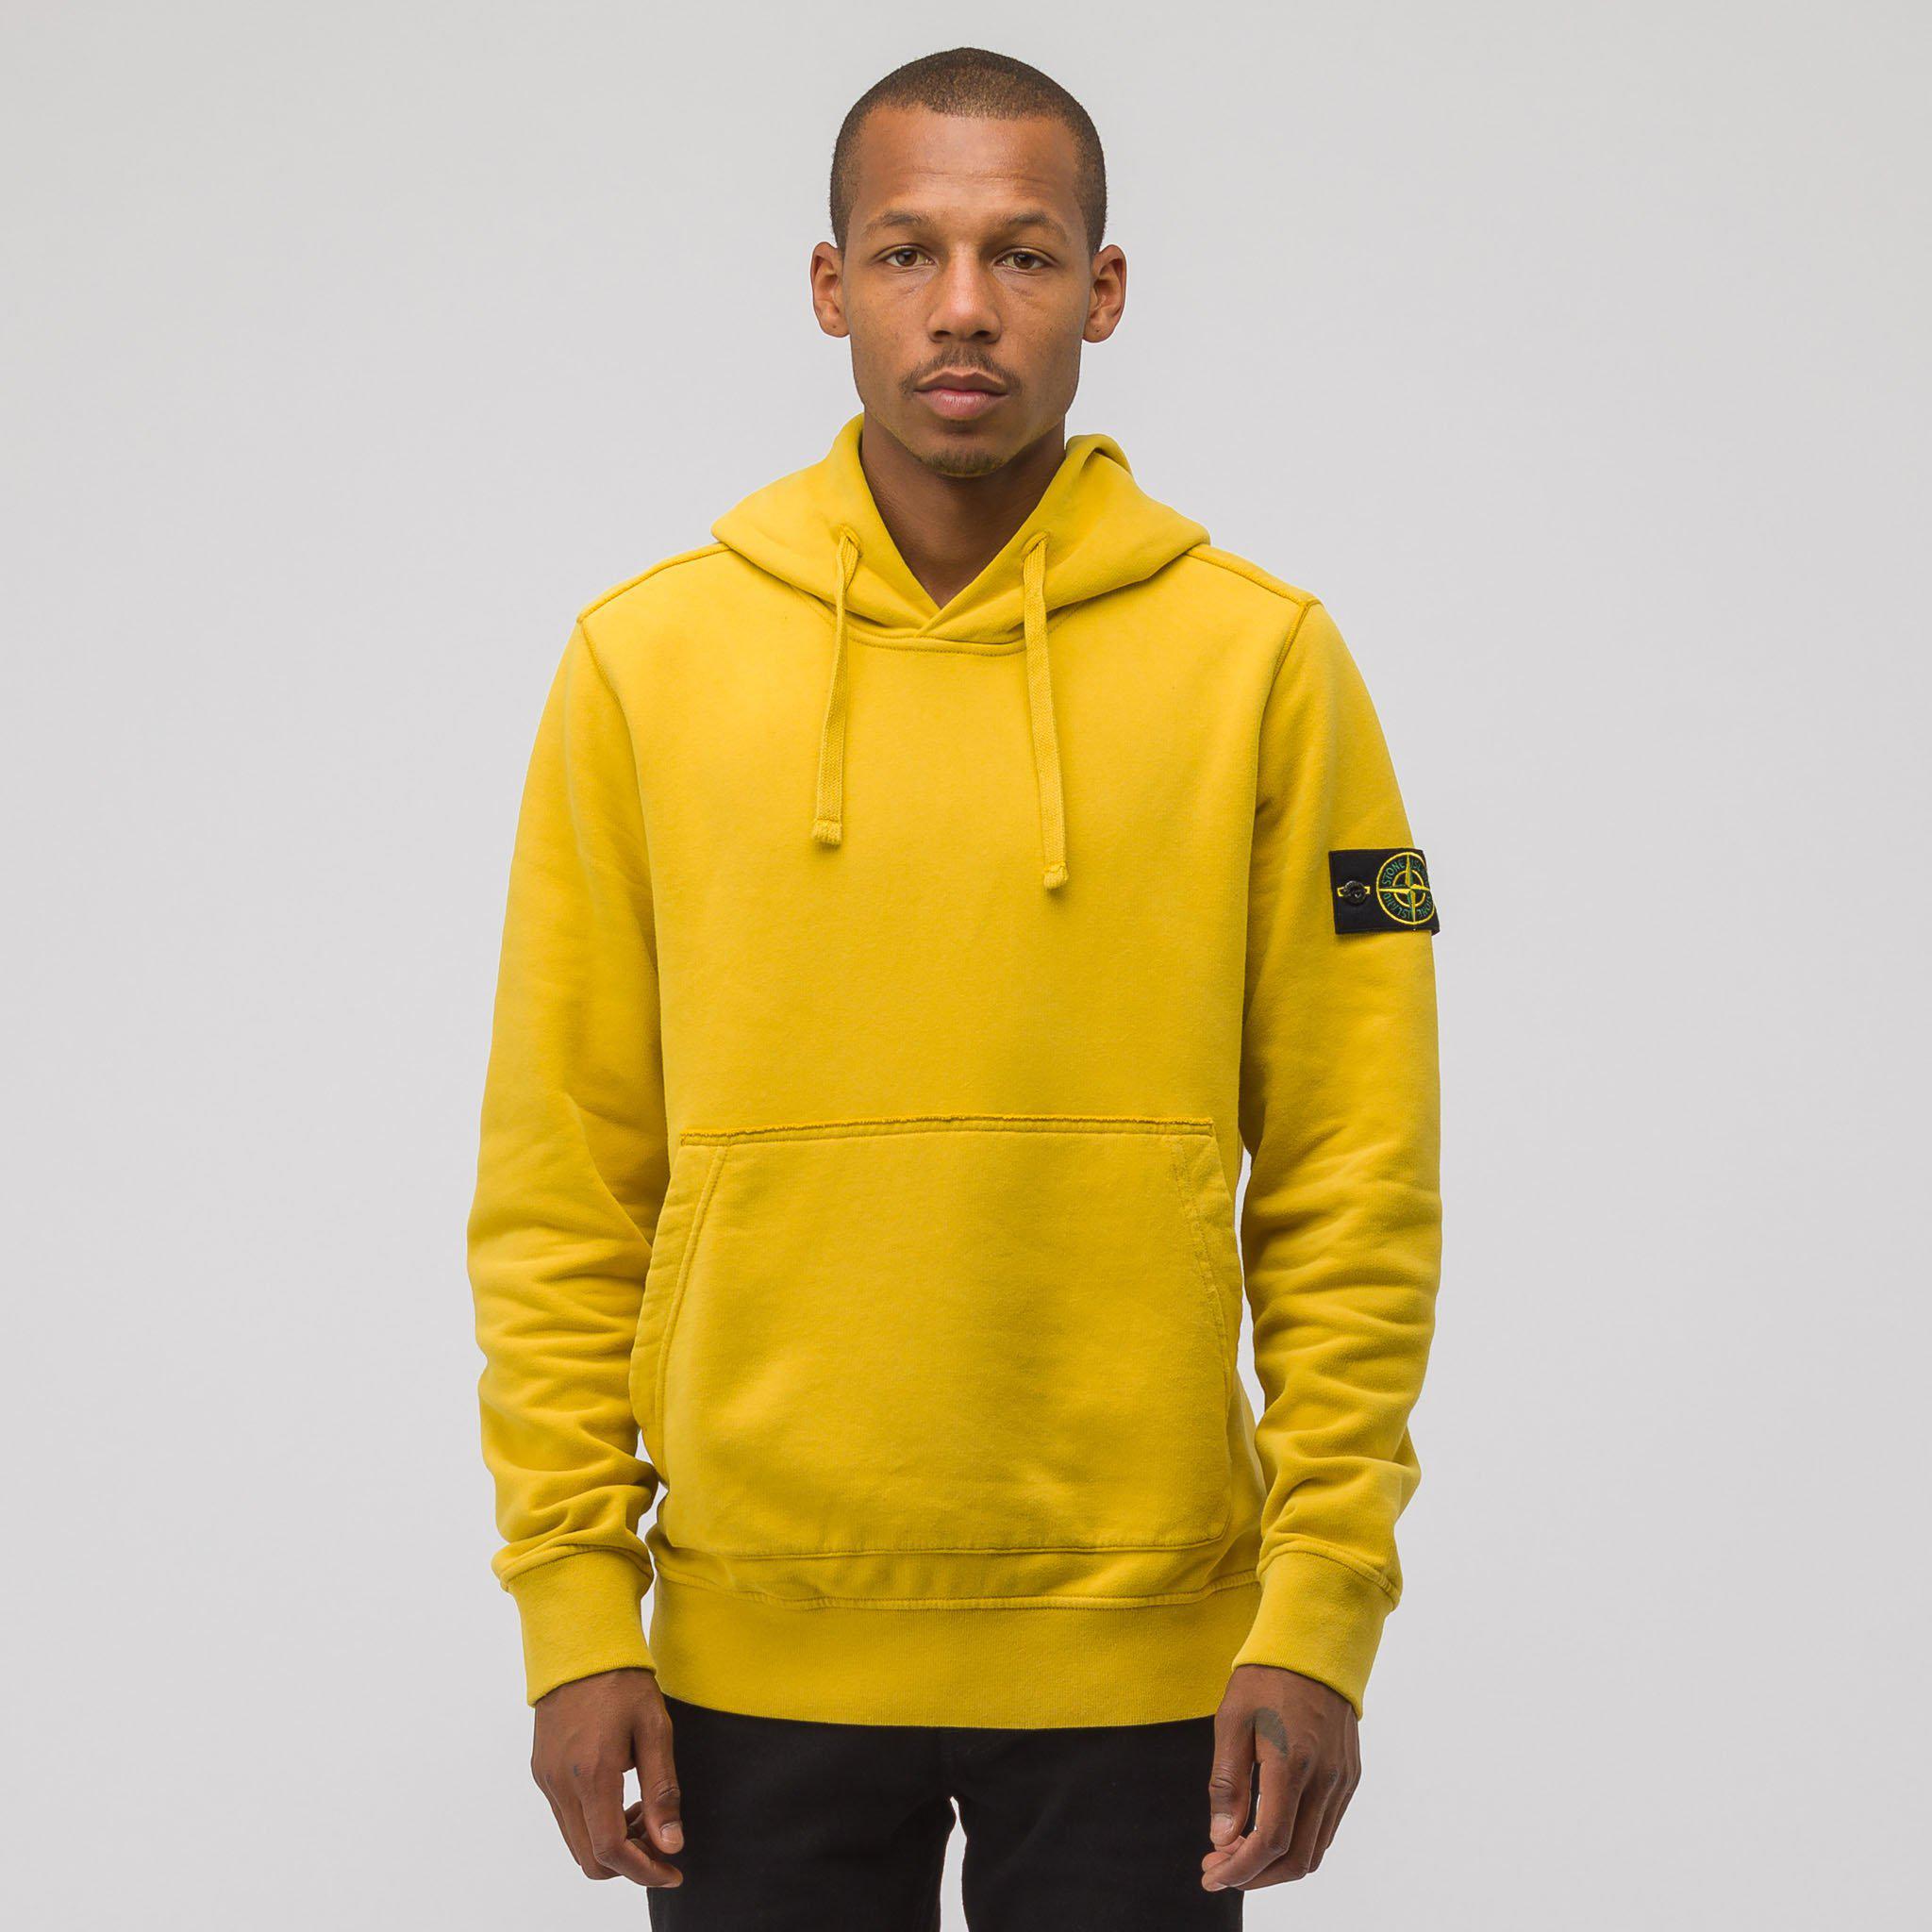 Stone Island Cotton-jersey Hooded Sweater in Yellow for Men - Lyst